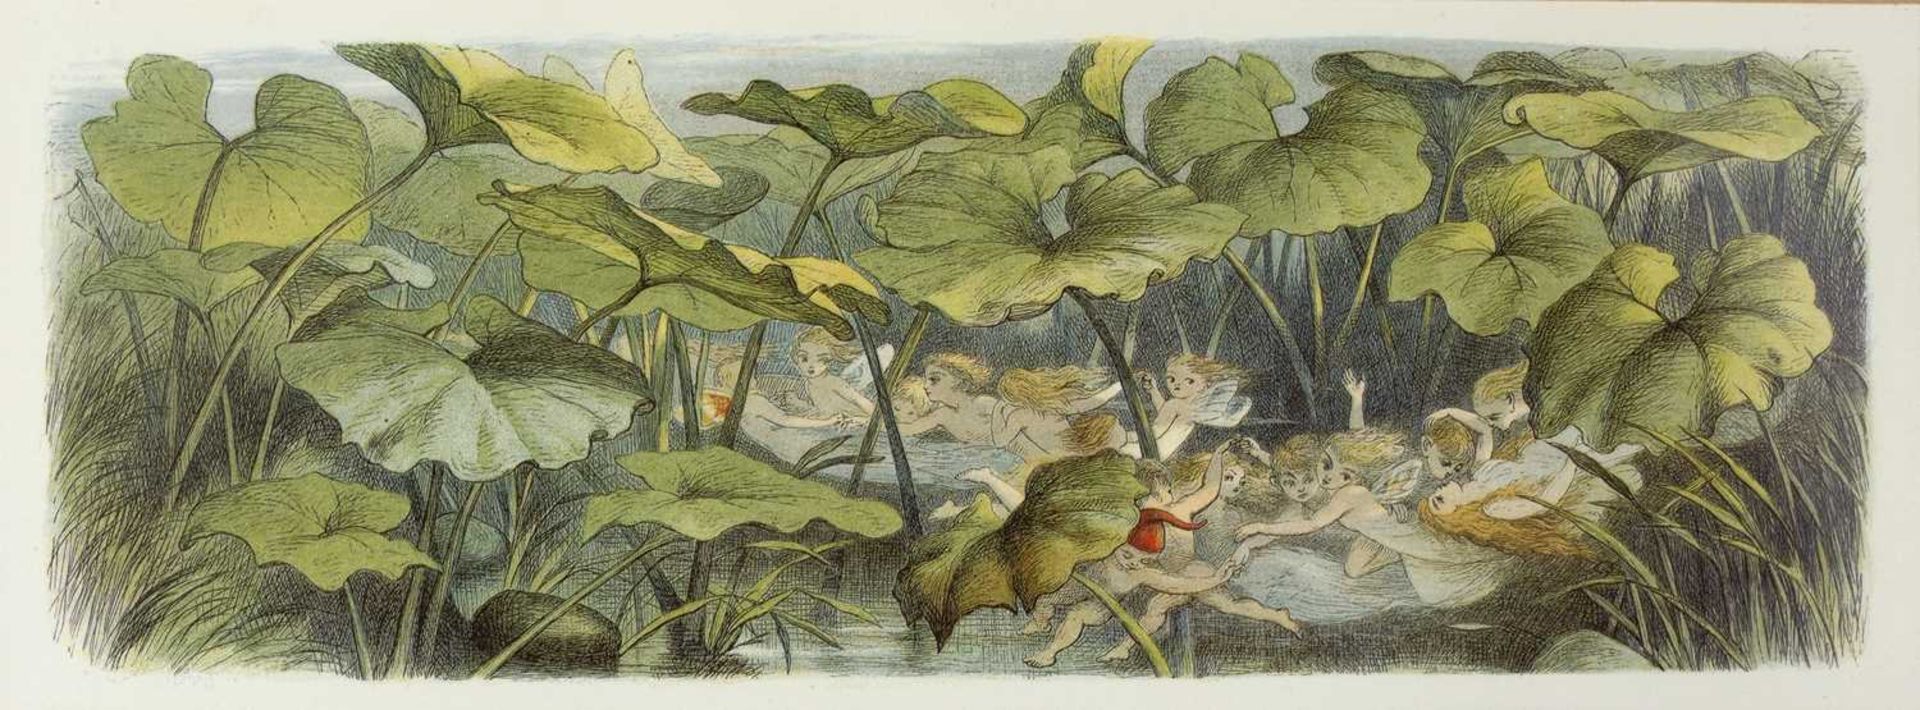 Richard Doyle (1824-1883) 'Wood elves at play', limited edition print, number 102/1500, with